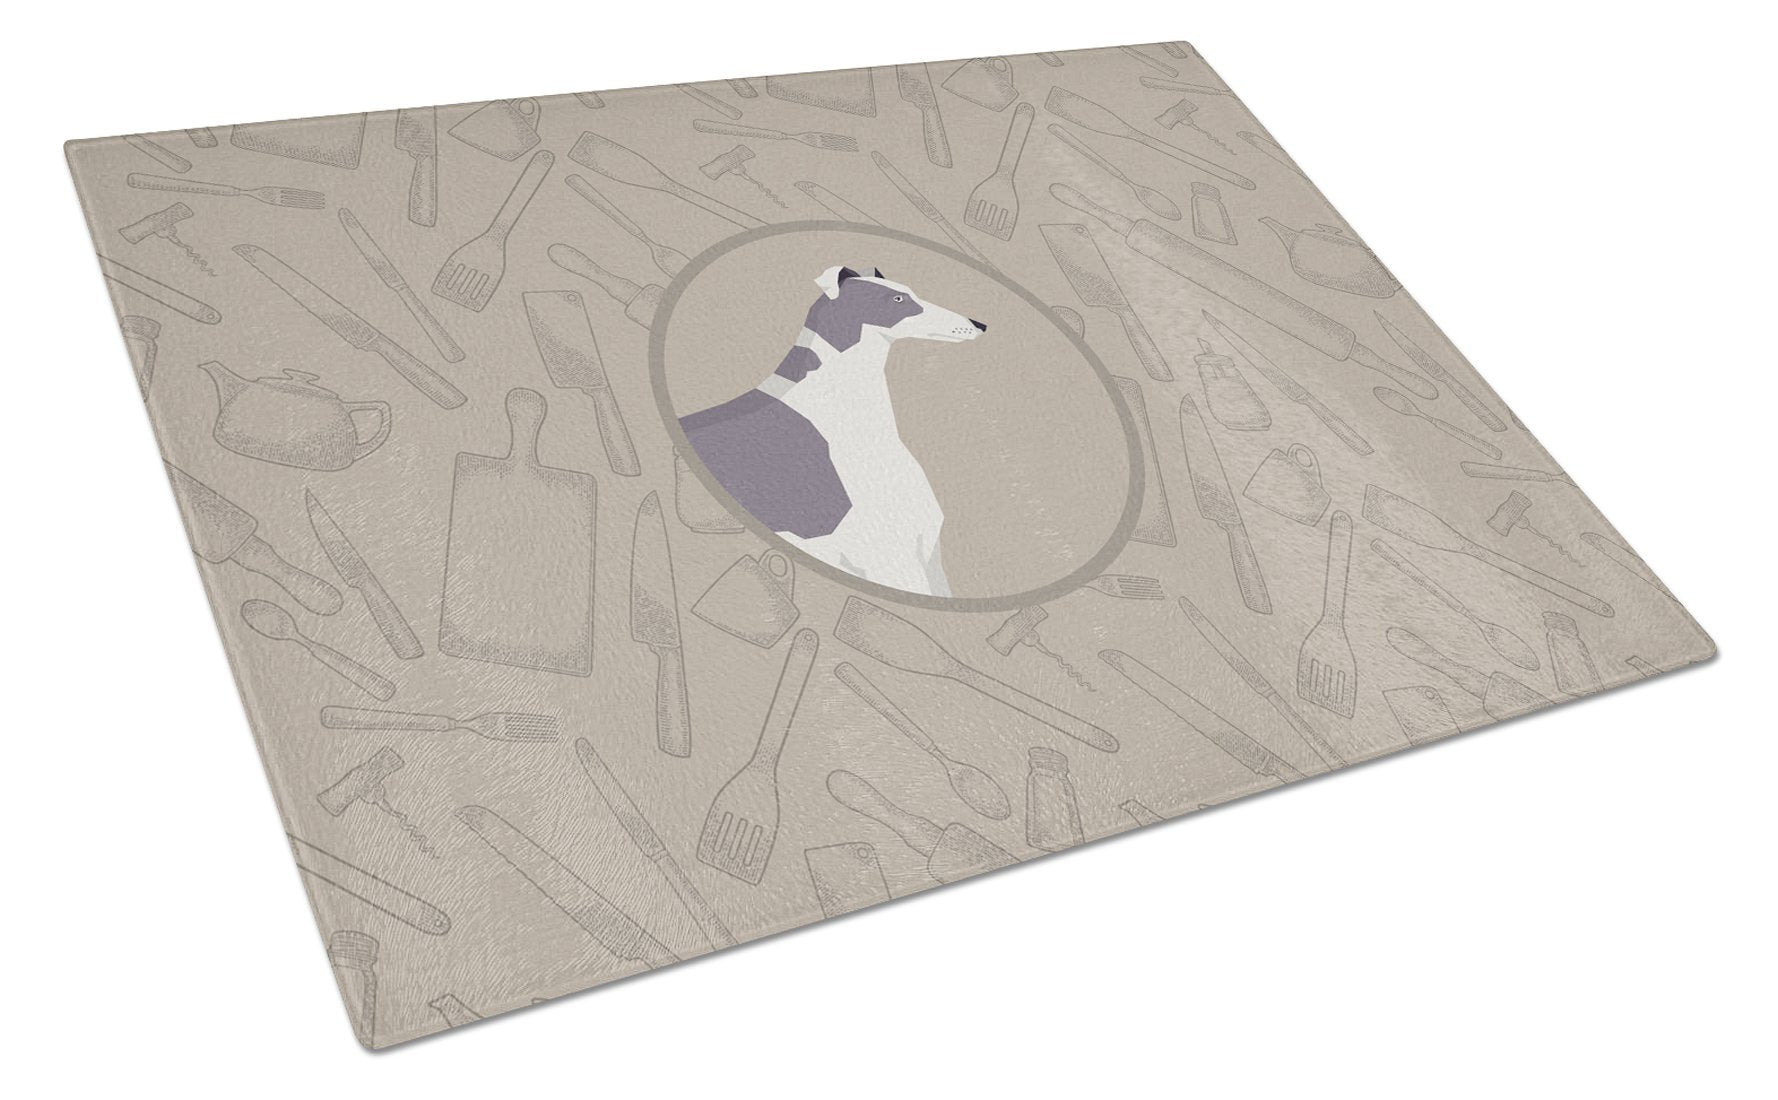 Greyhound In the Kitchen Glass Cutting Board Large CK2190LCB by Caroline's Treasures